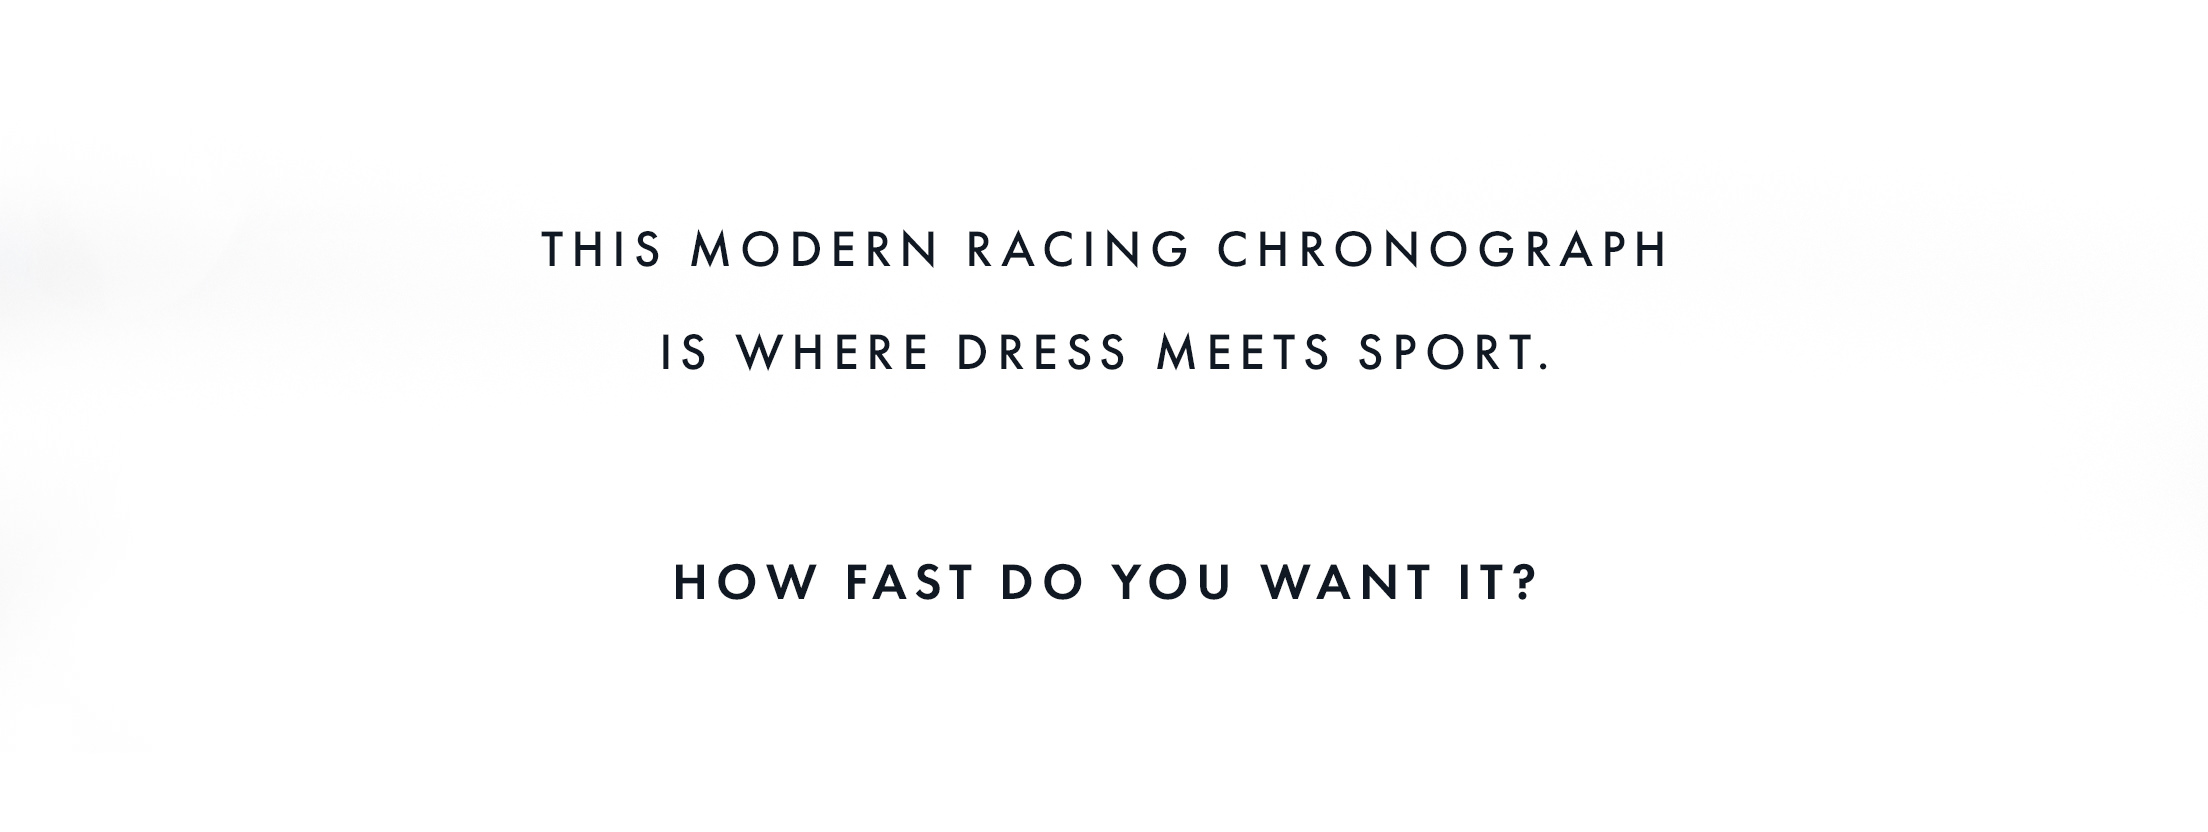 The modern racing chronograph is where dress meets sport.